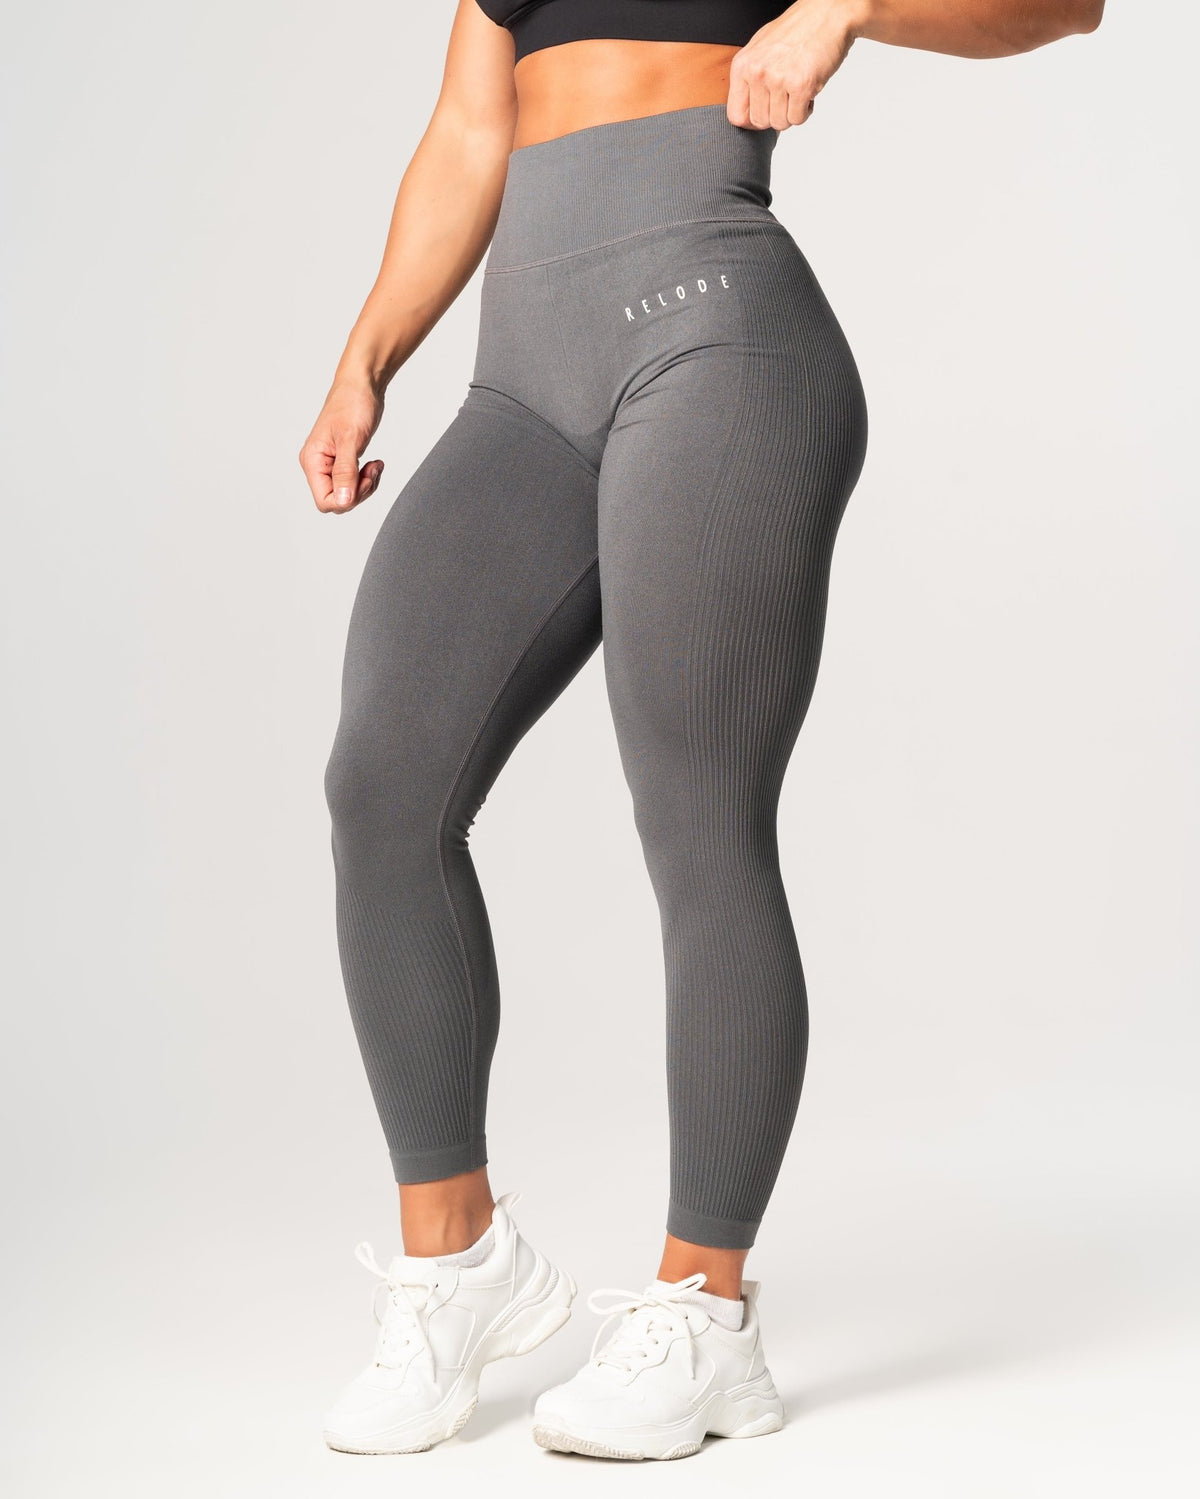 NVGTN Olive Solid Seamless Leggings Green - $36 (25% Off Retail